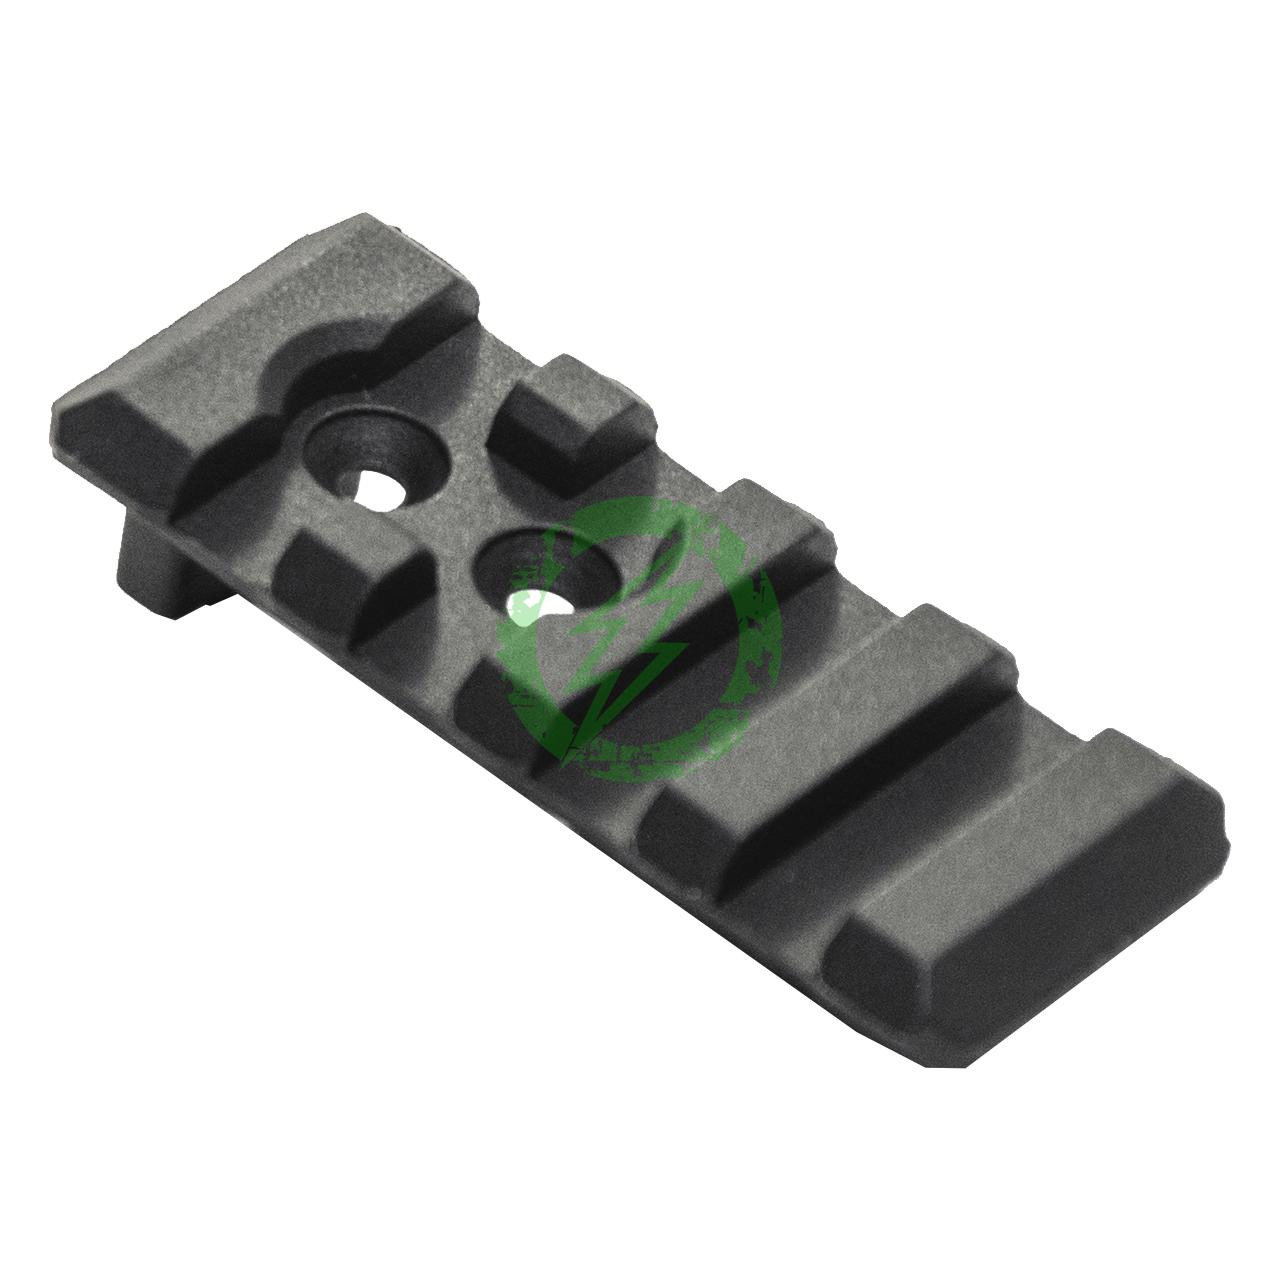  Action Army AAP-01 Rear Sight Rail | Black 